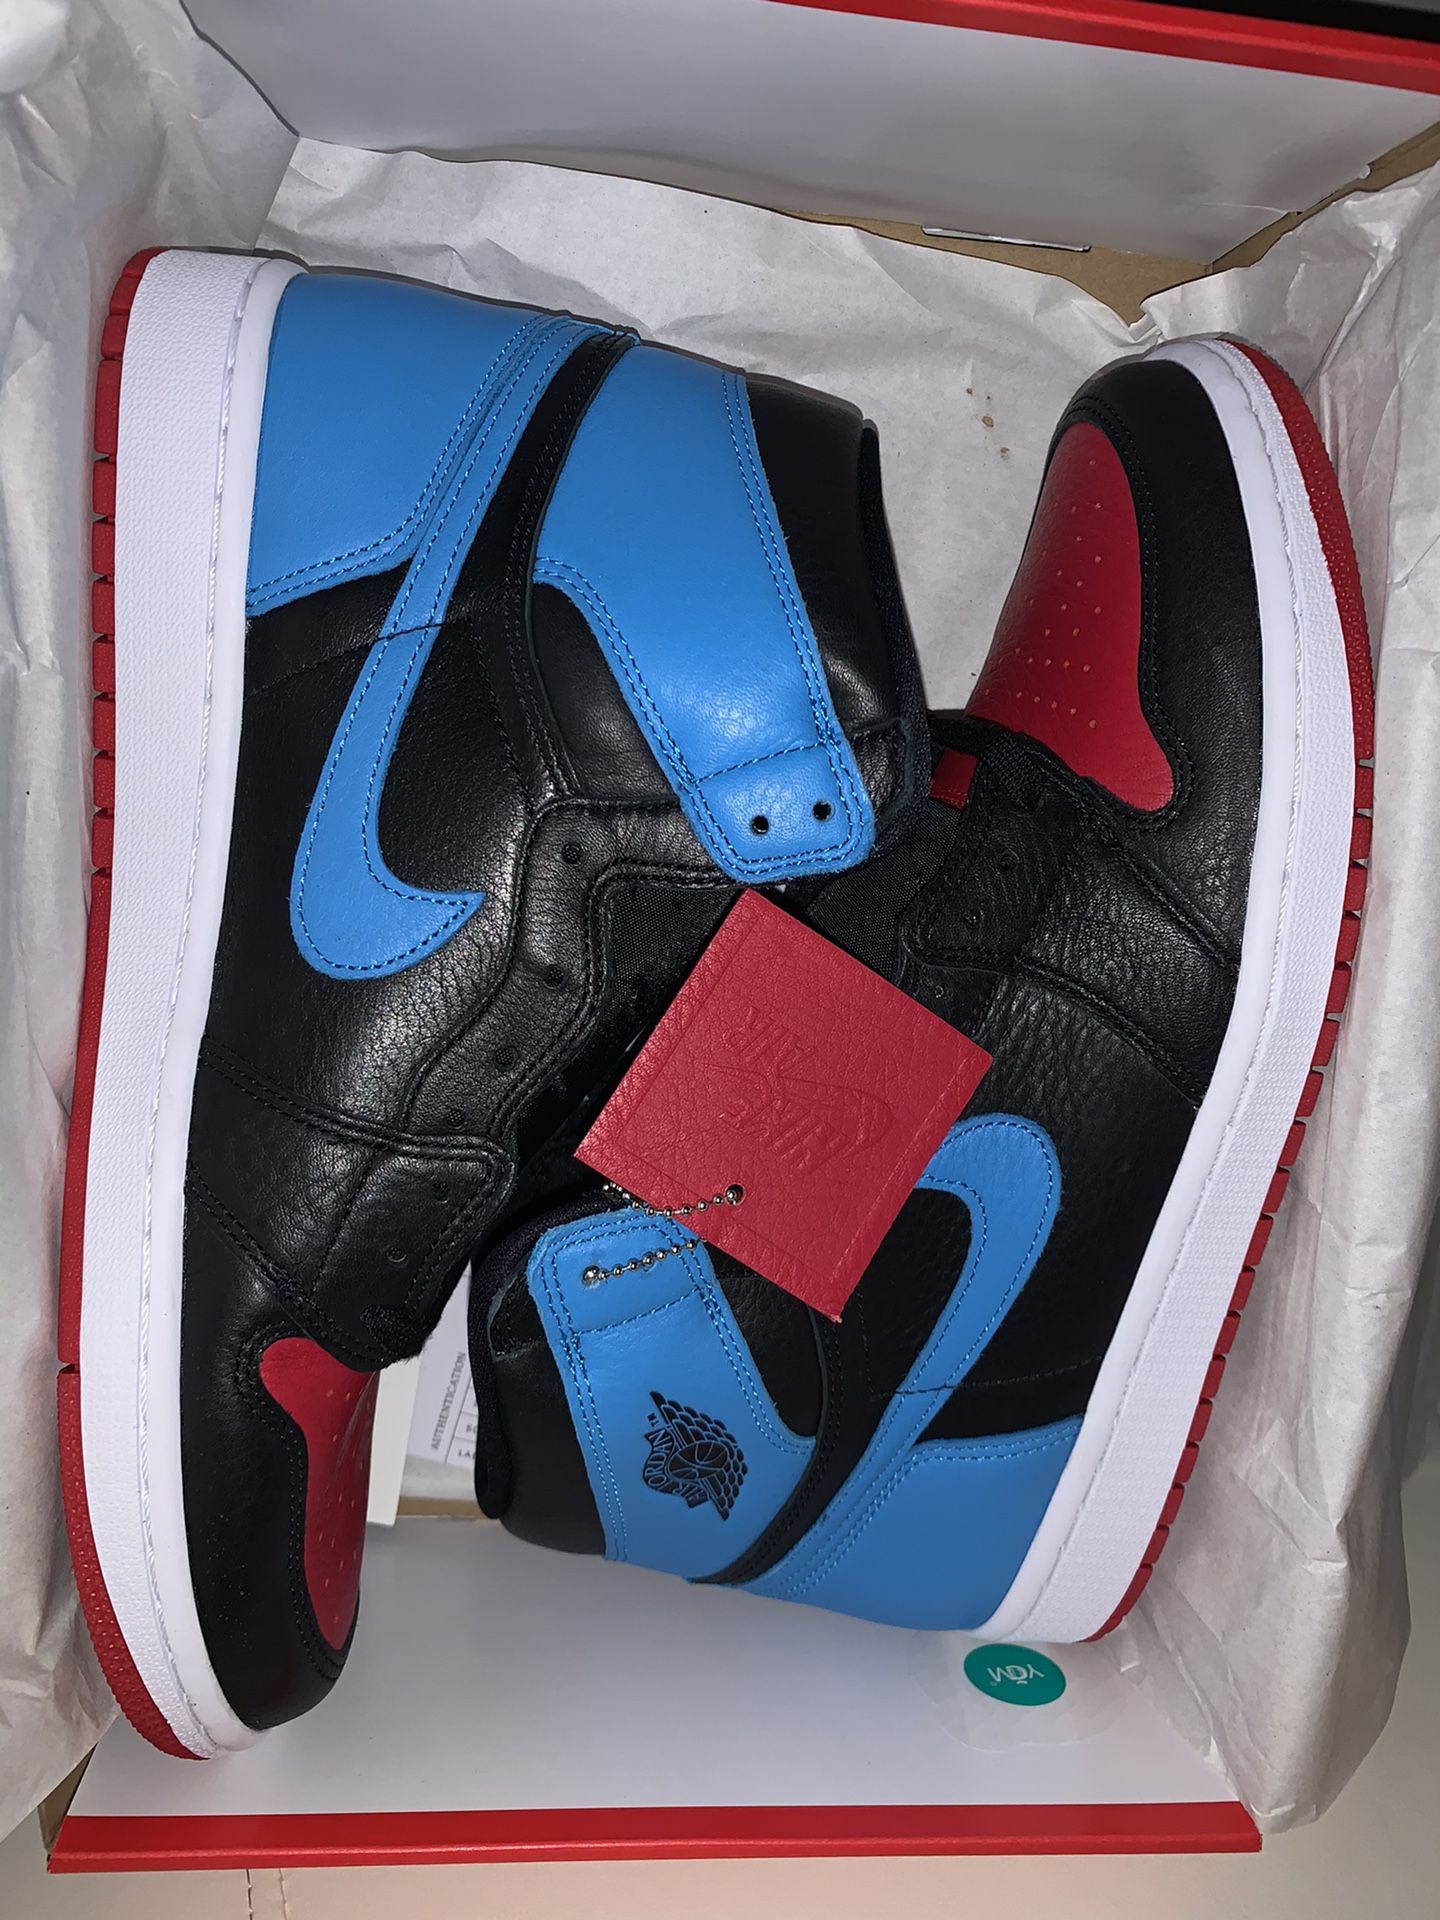 DS UNC TO CHICAGO - JORDAN 1 - SIZE 10M/12W - FIRM ON PRICE! TAKE IT OR LEAVE IT